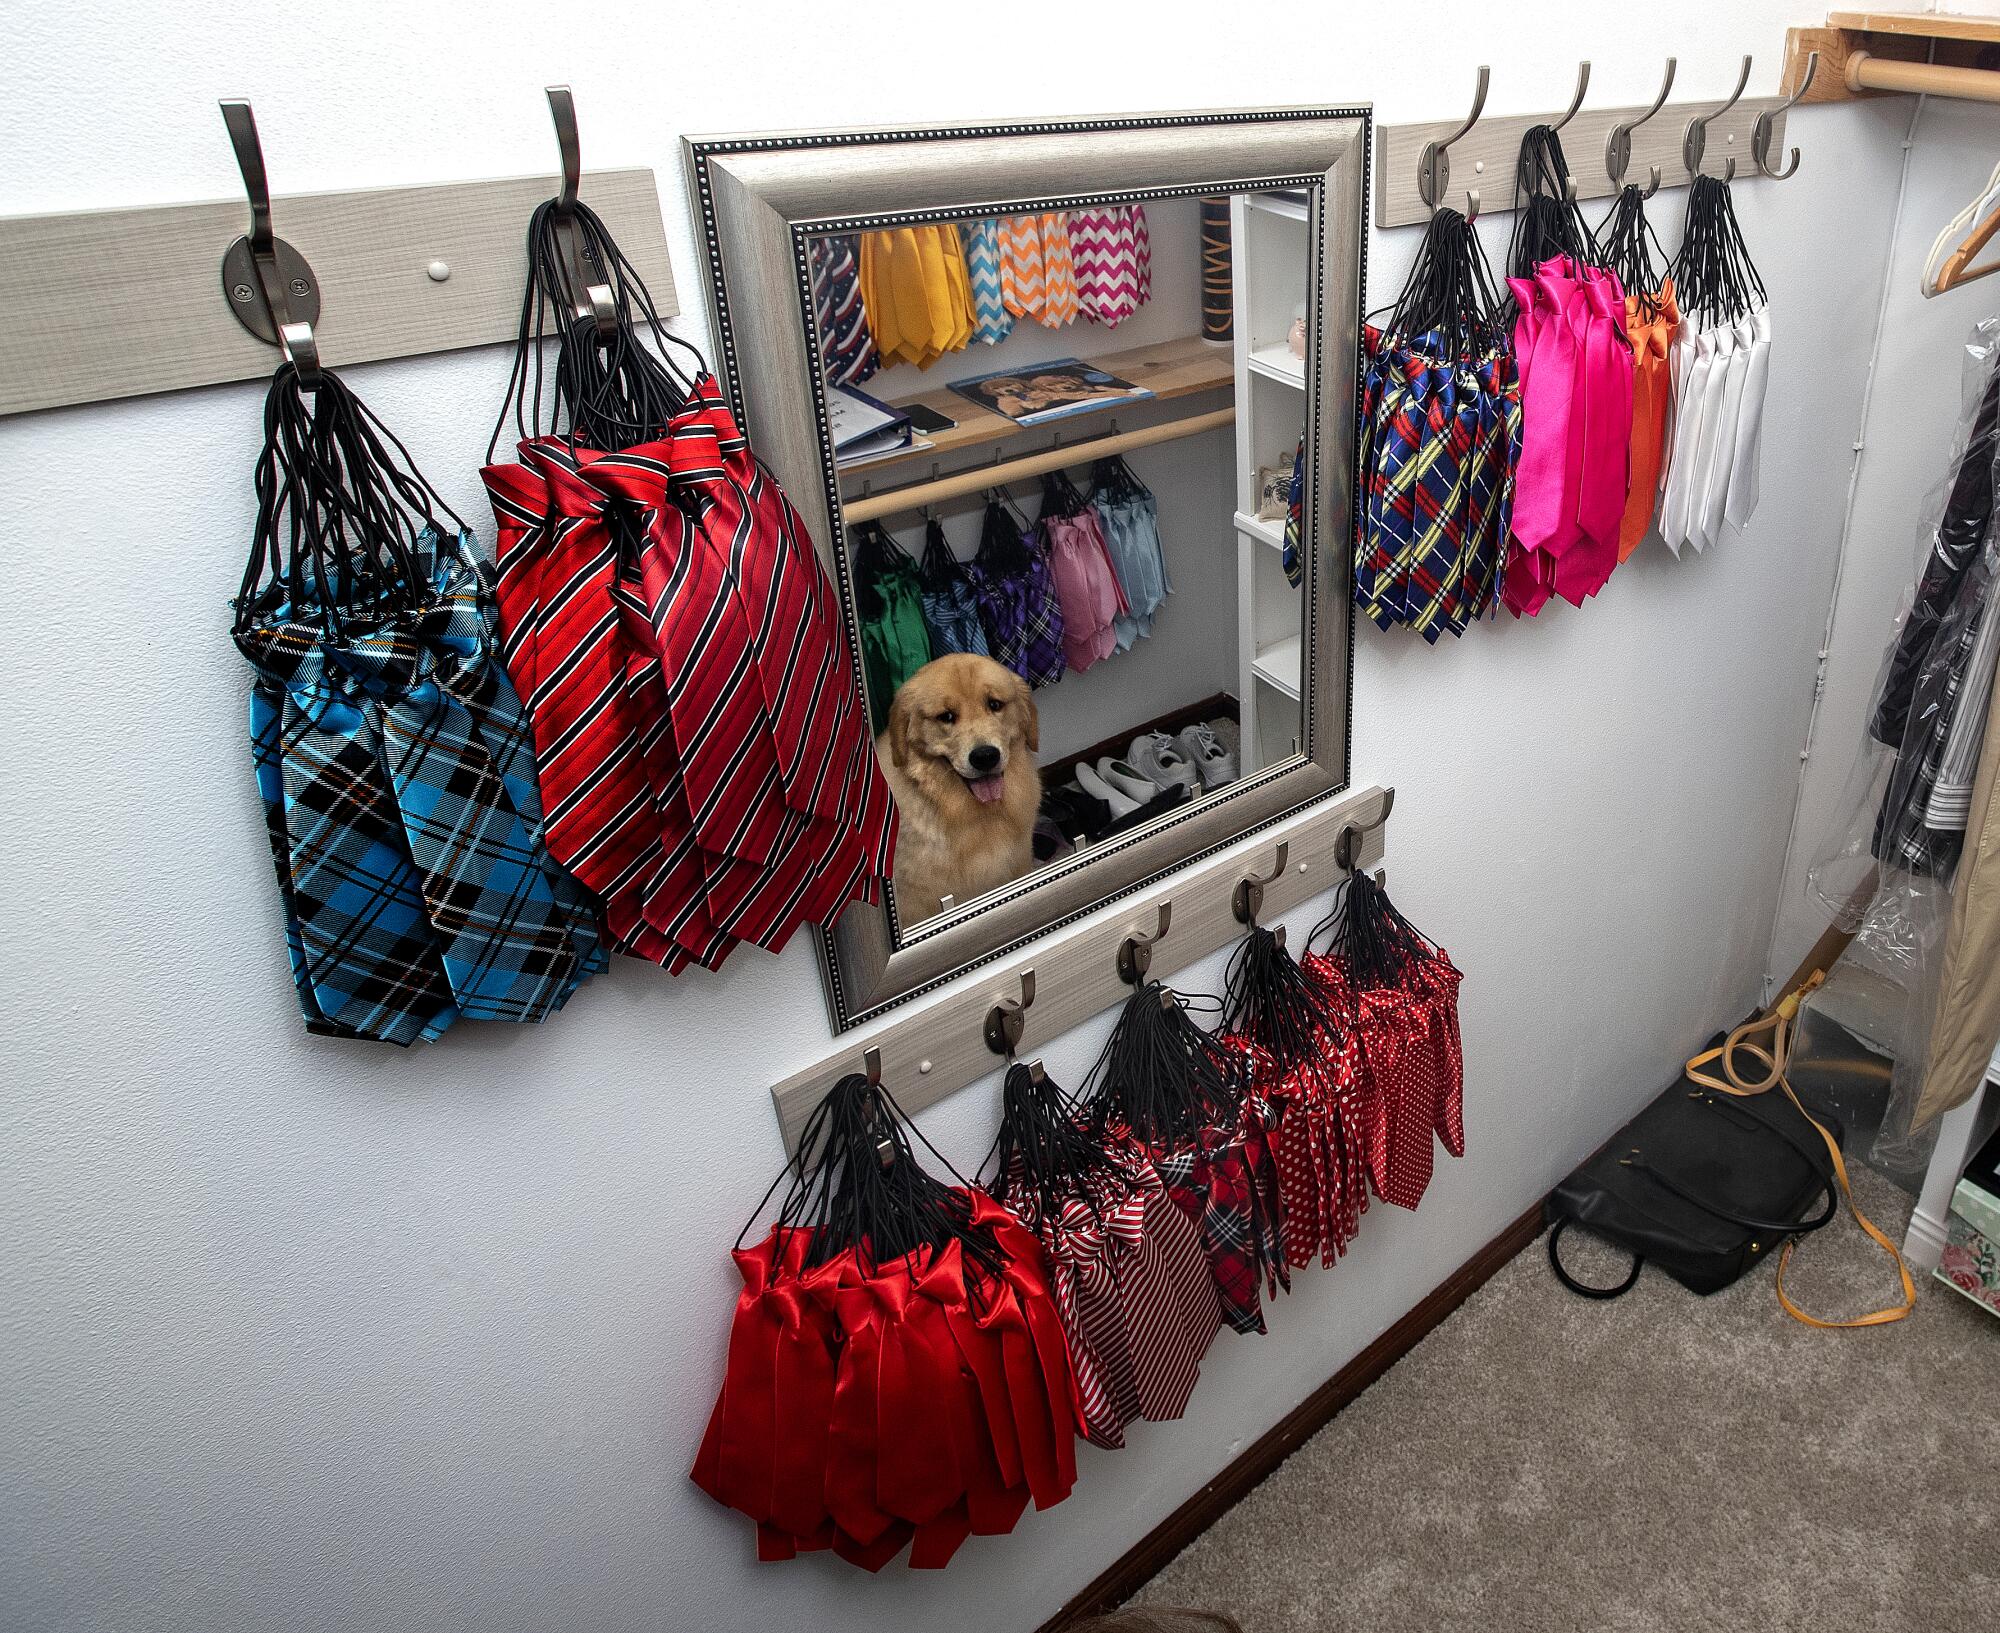 A golden retriever sits in a closet full of novelty ties.